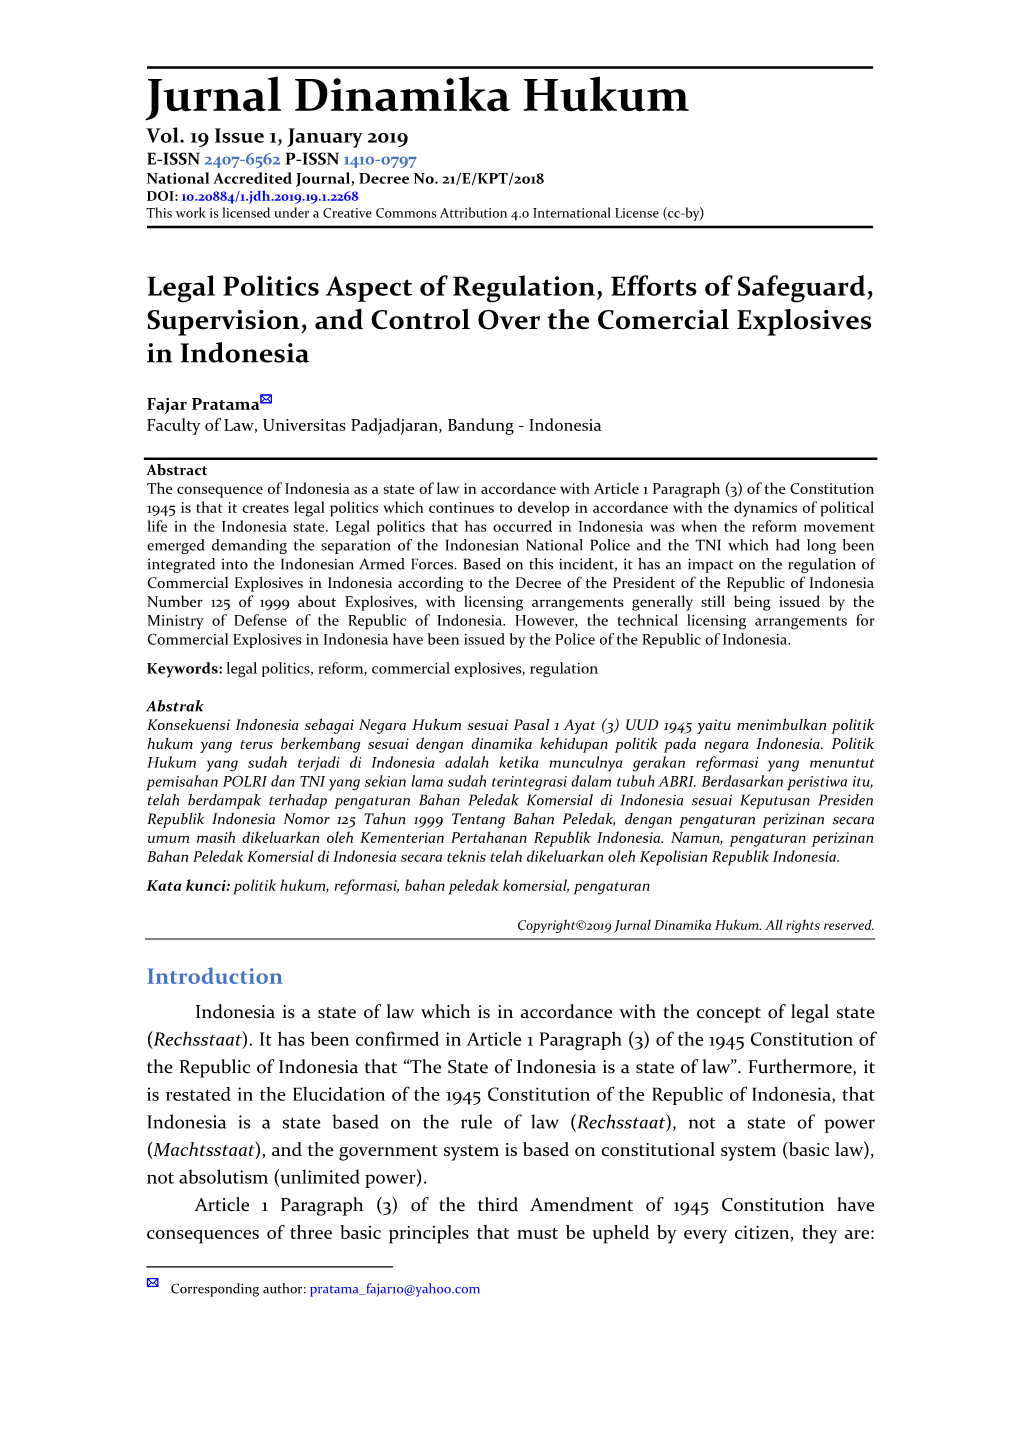 Legal Politics Aspect of Regulation, Efforts of Safeguard, Supervision, and Control Over the Comercial Explosives in Indonesia 1